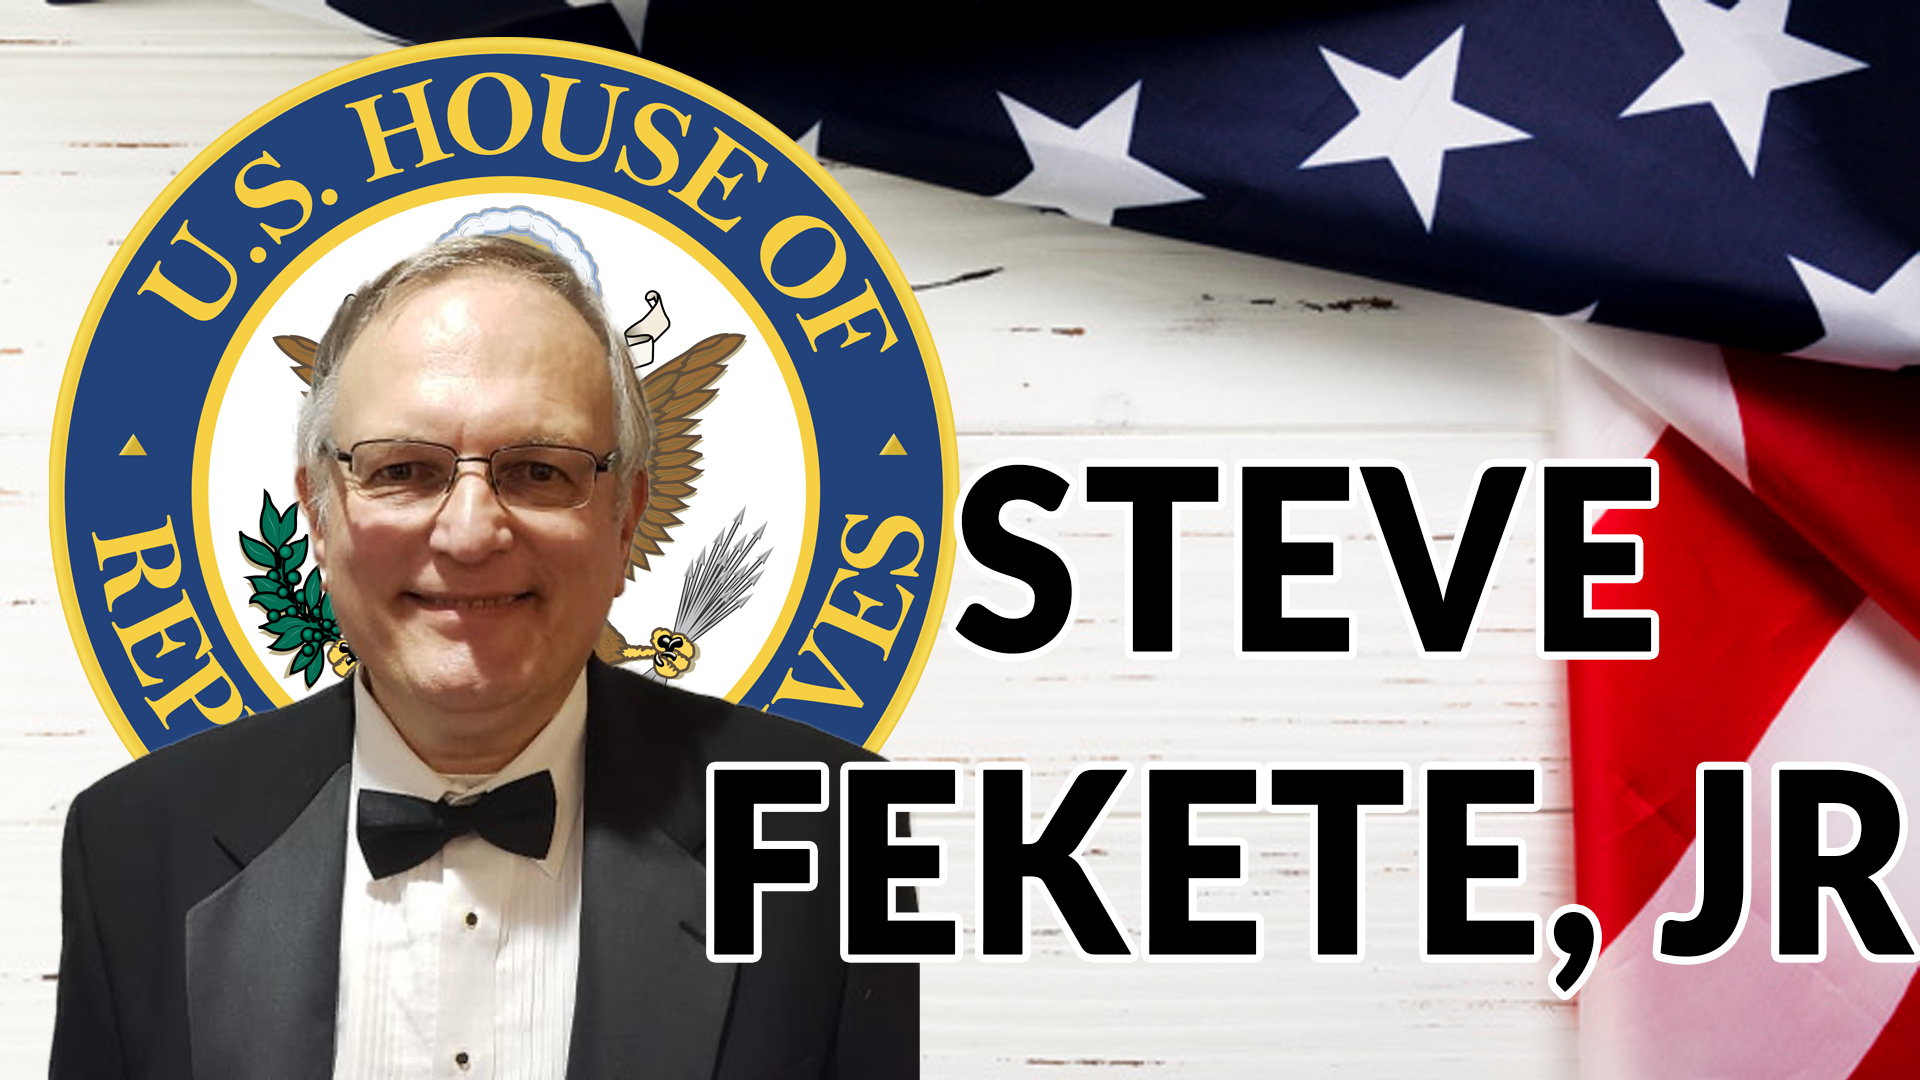 You are currently viewing Steve Fekete, Jr, NC House Candidate